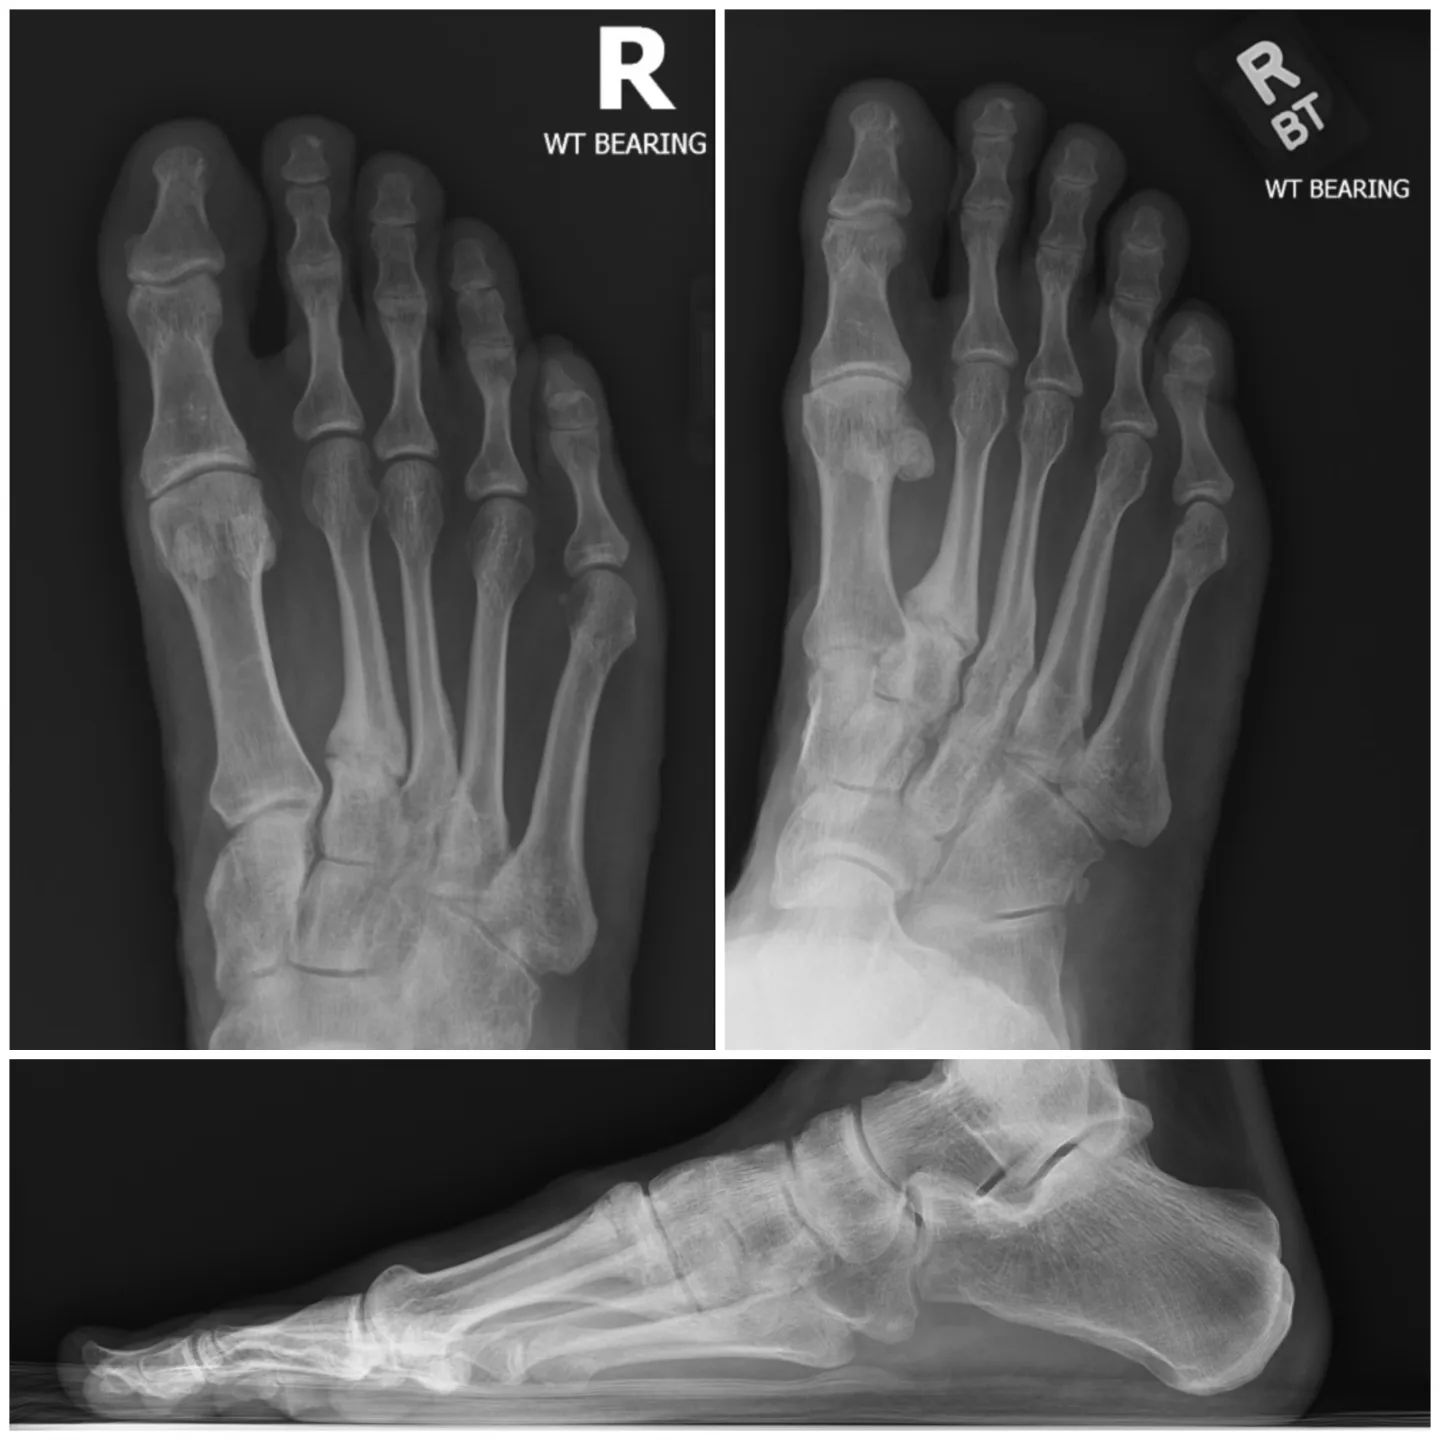 xRay #Vision Foot/Second Metatarsal Still Fuct, bUt iCan Run oR Kick Someone iN The Face aS Necessary & The Doc Just Ordered Me aBone Stimulator To HeaL iT #Selfie @RussellRope @ https://russellrope.com/tag/foot 🦶🏻🦴🥋☠️ (Caused By Stalkers 12/23/18)
.
.
.
.
#media #art #technology #entertainment #lifestyle #xray #photography #healthclub #selfdefense #hollywood #losangeles #injury #health #og #russellrope #selfie #socialmedia #social #beast #fit #active #fitness #healing #feet #ninja #martialarts #energy #bones